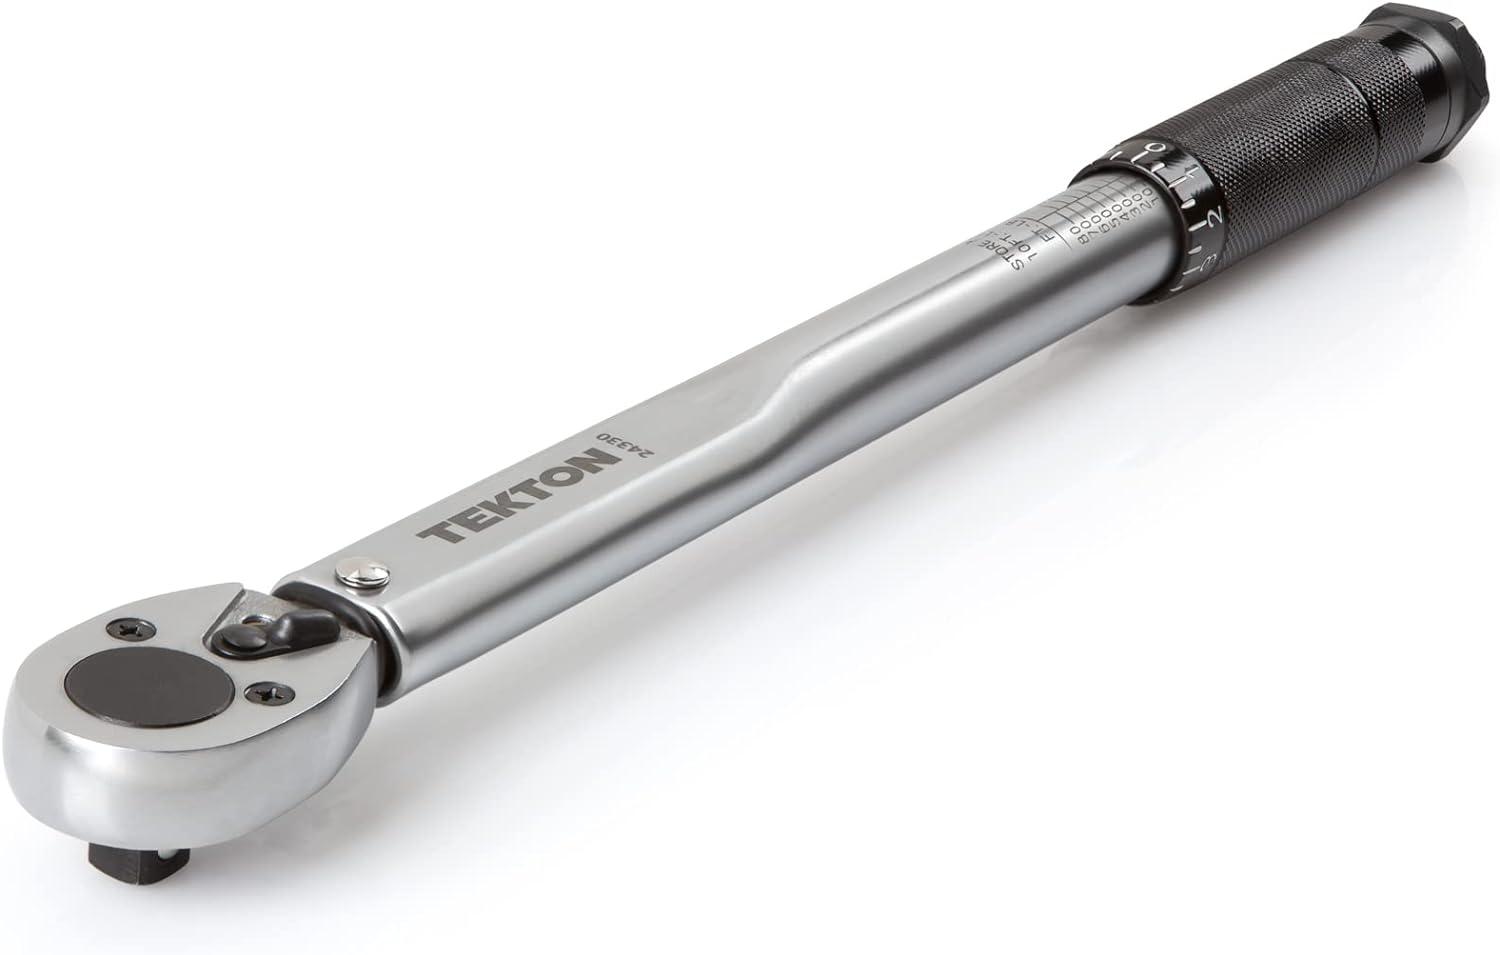 Tekton 3/8in Drive Micrometer Torque Wrench for $39.28 Shipped